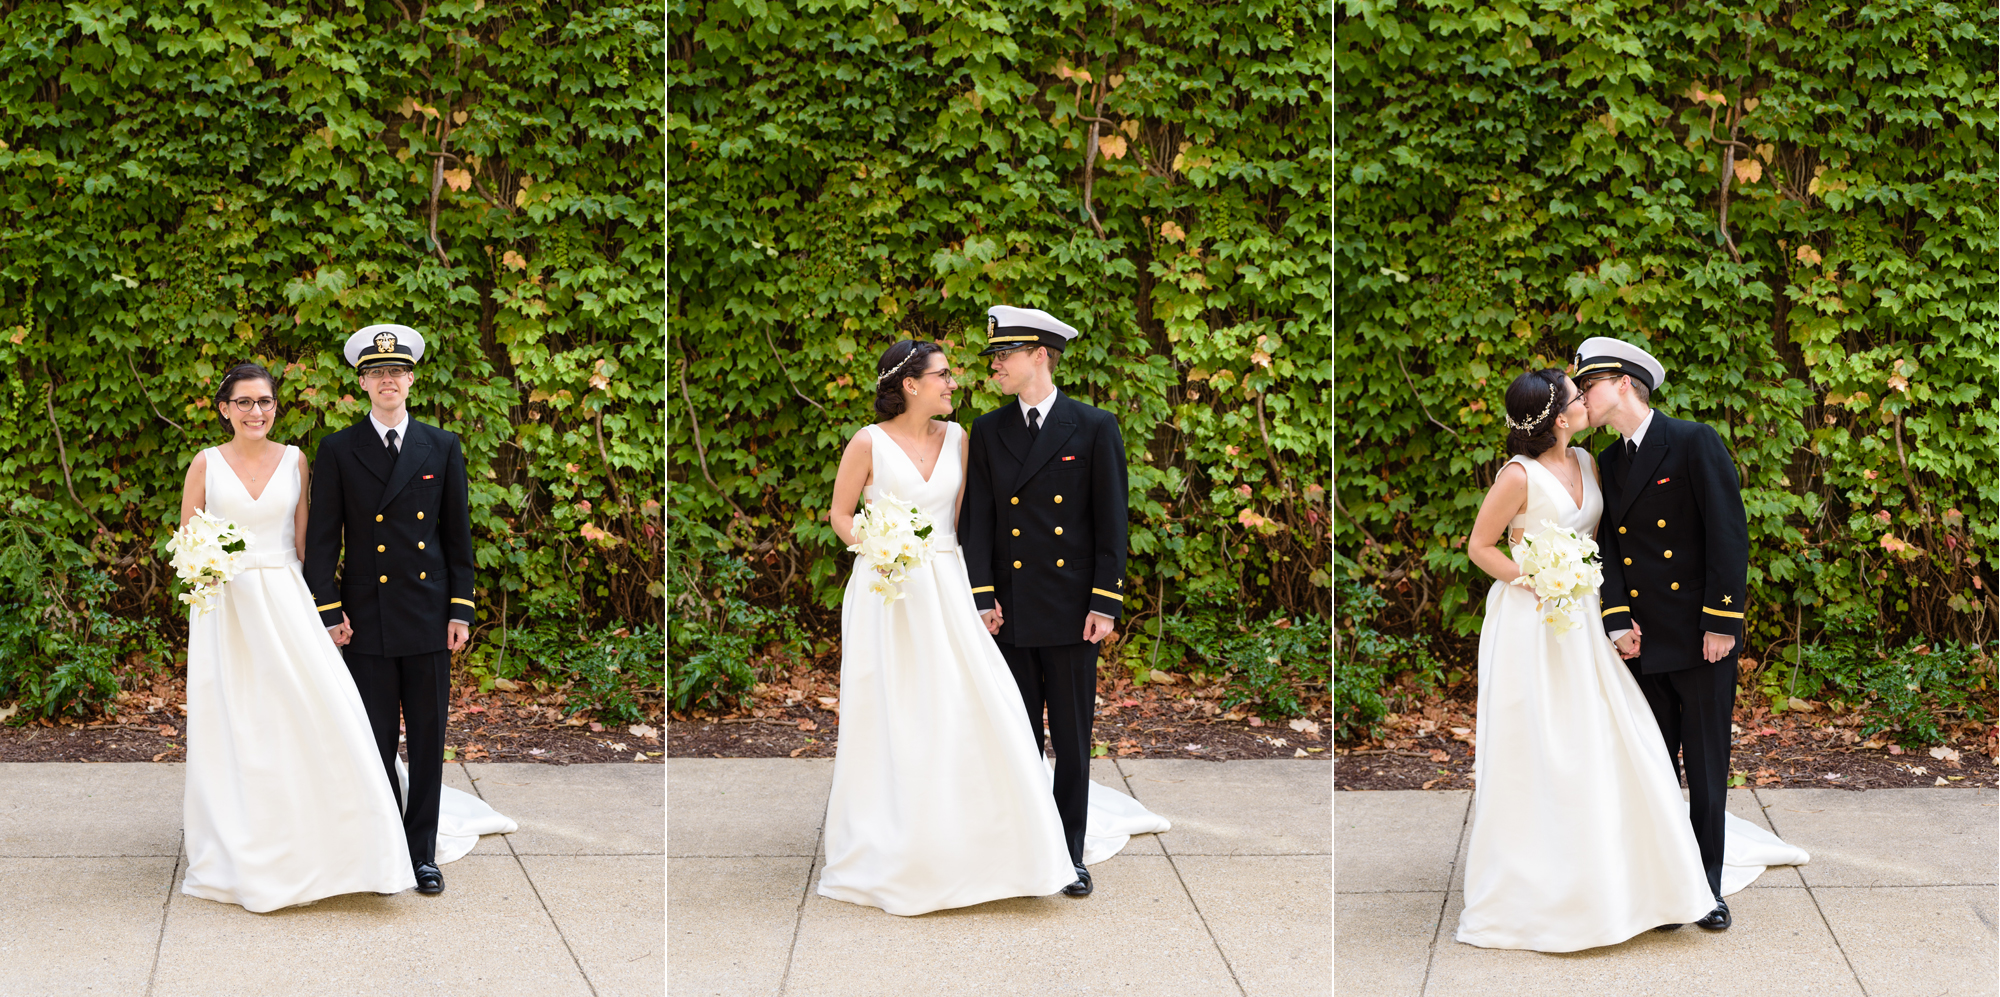 Bride & Groom in front of an ivy wall at Fitzpatrick school of Engineering after a wedding ceremony at the Basilica of the Sacred Heart on the campus of the University of Notre Dame